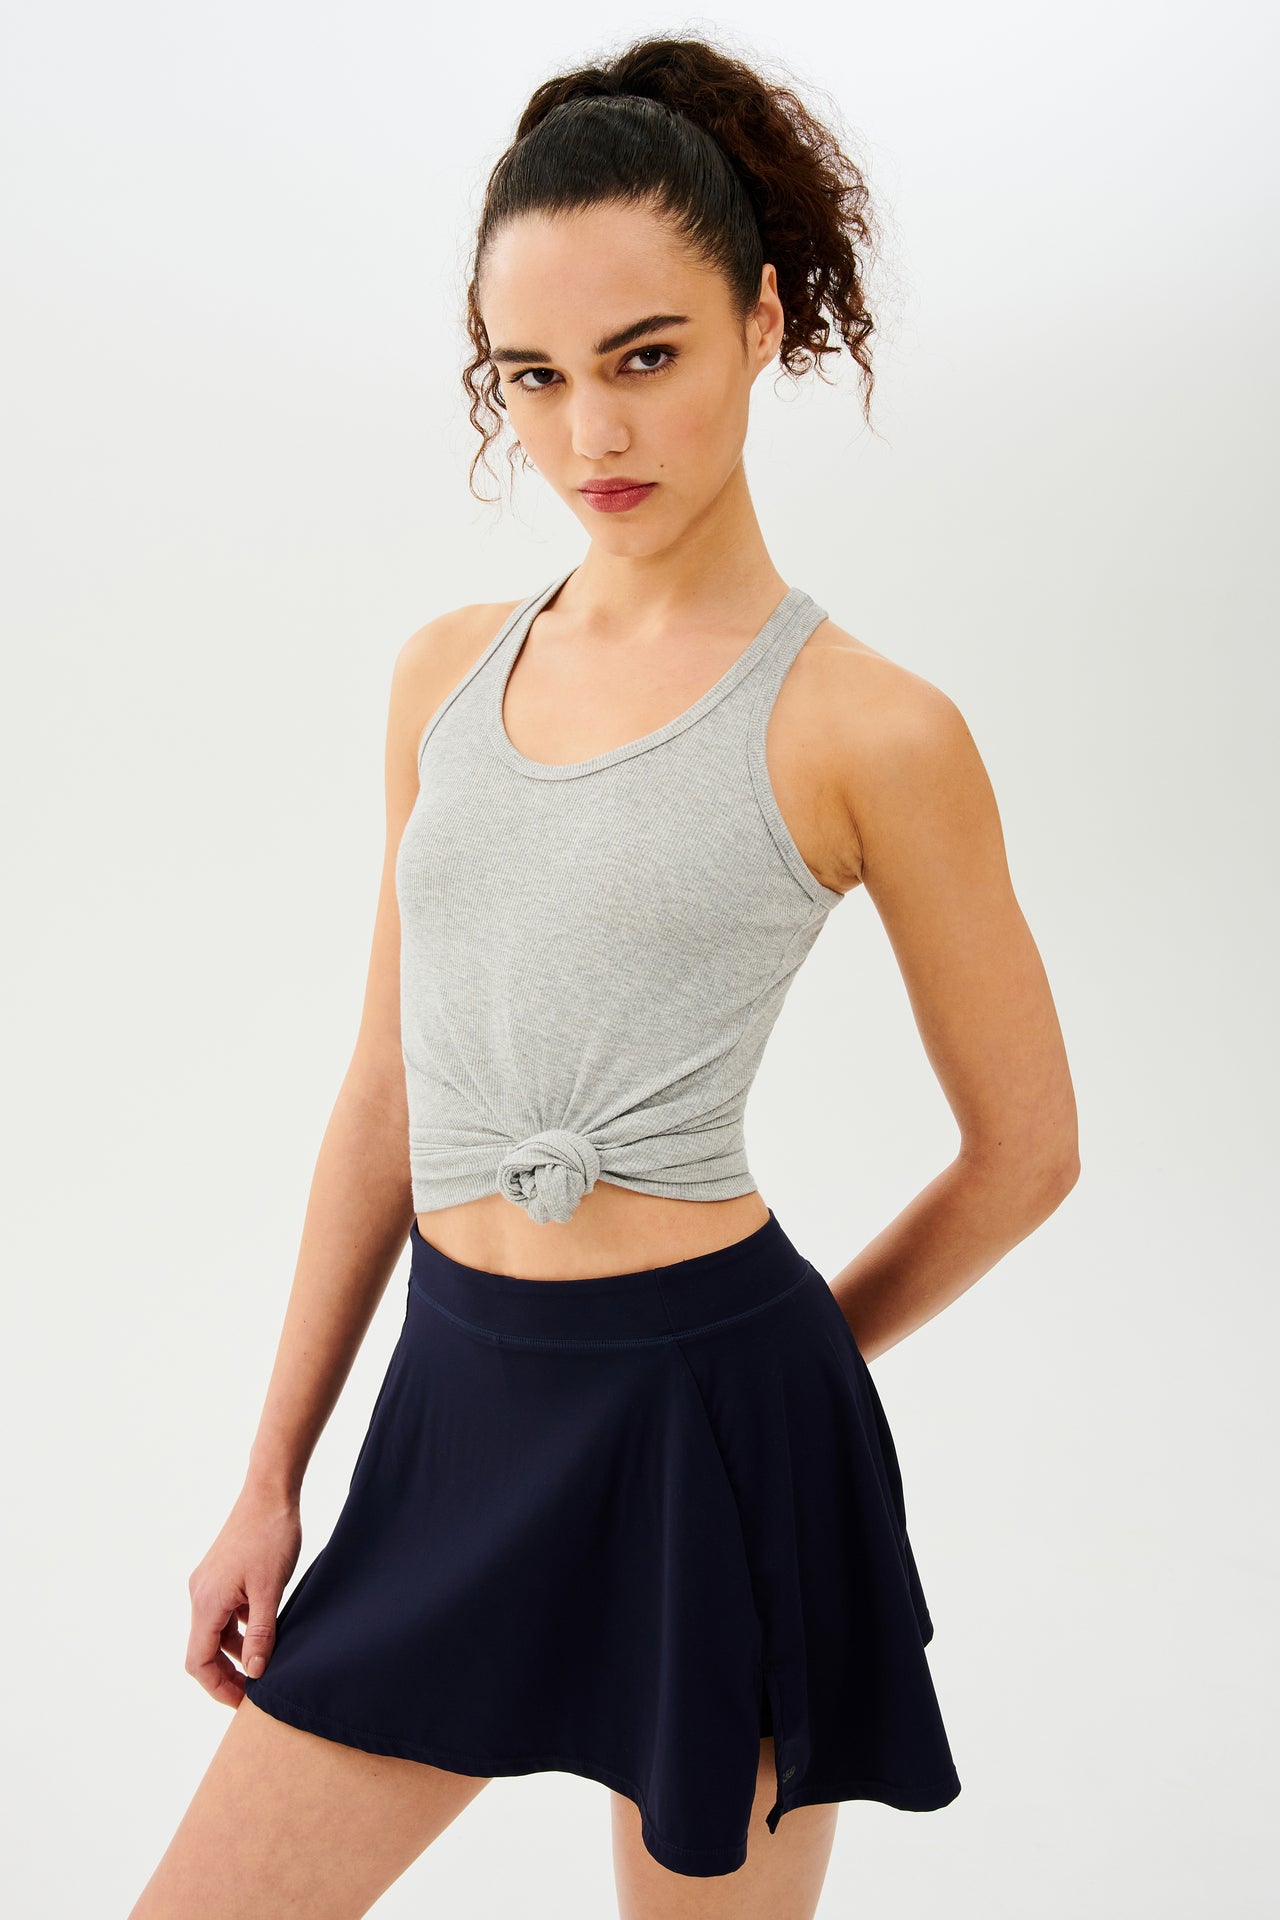 Side view of girl wearing a light grey tank top tied in a knot at the waist and black skirt 